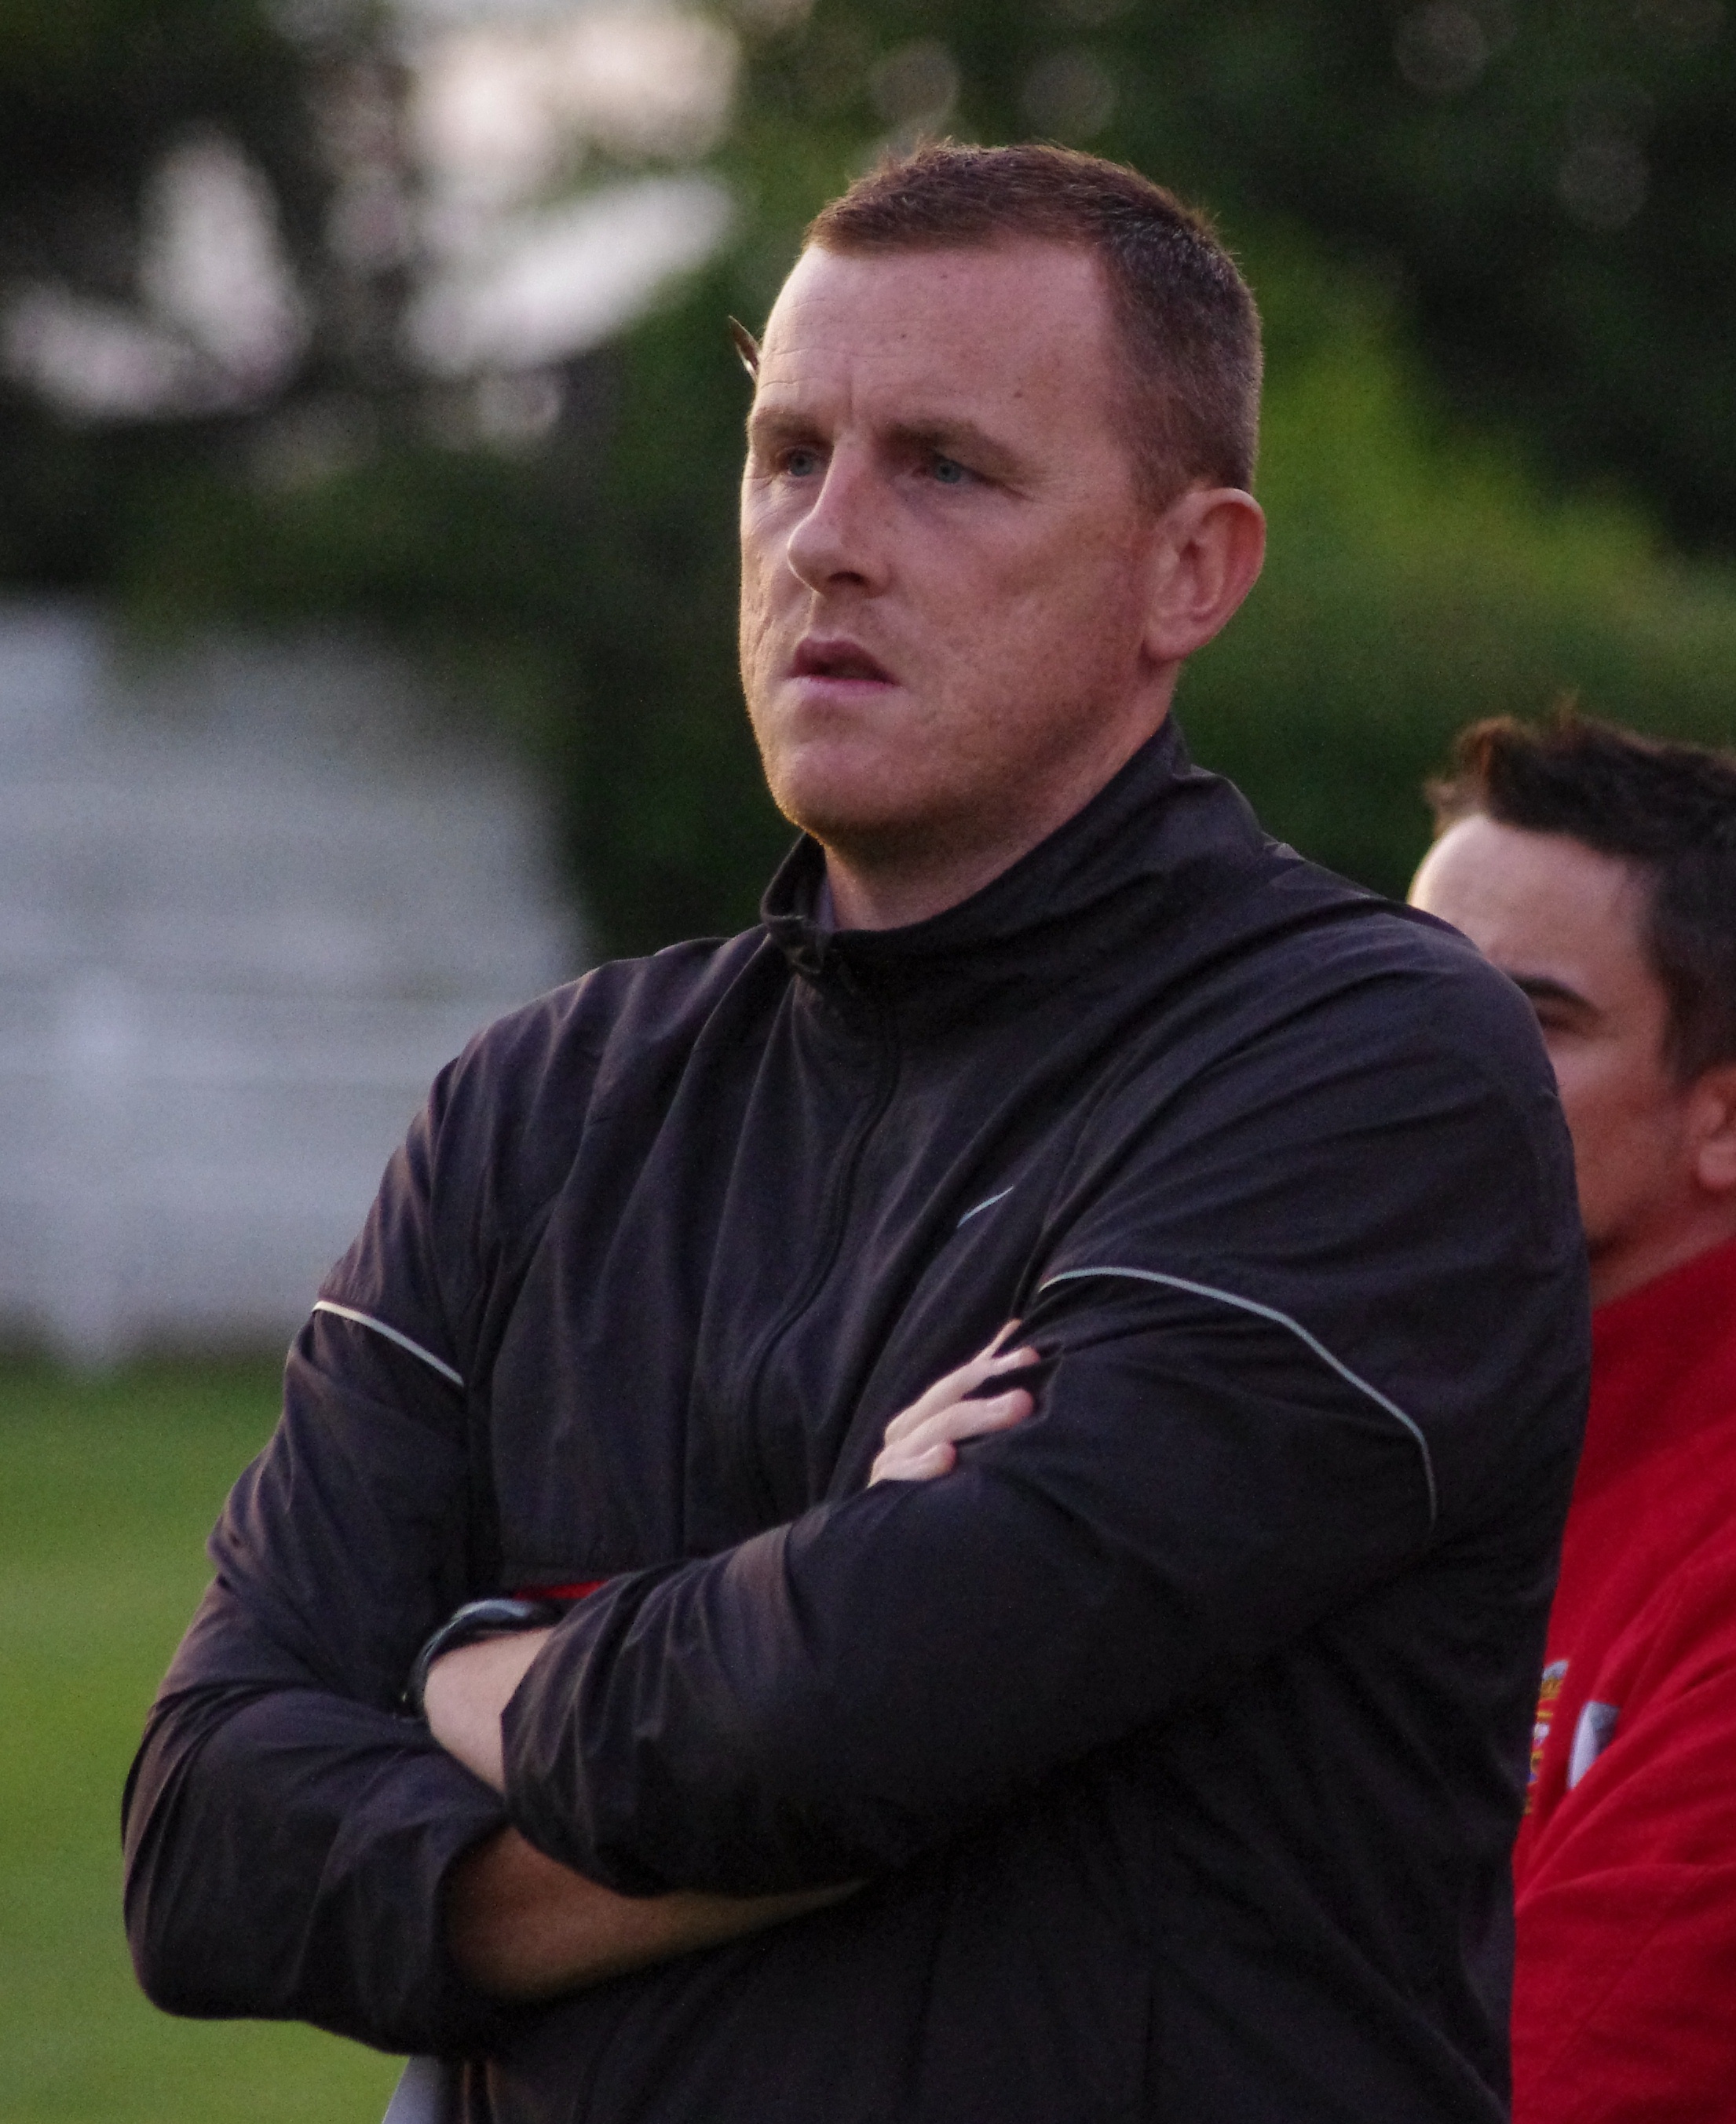 Shaw Lane Aquaforce manager Craig Elliott was verbally attacked during the 7-2 win over Teversal on Tuesday night